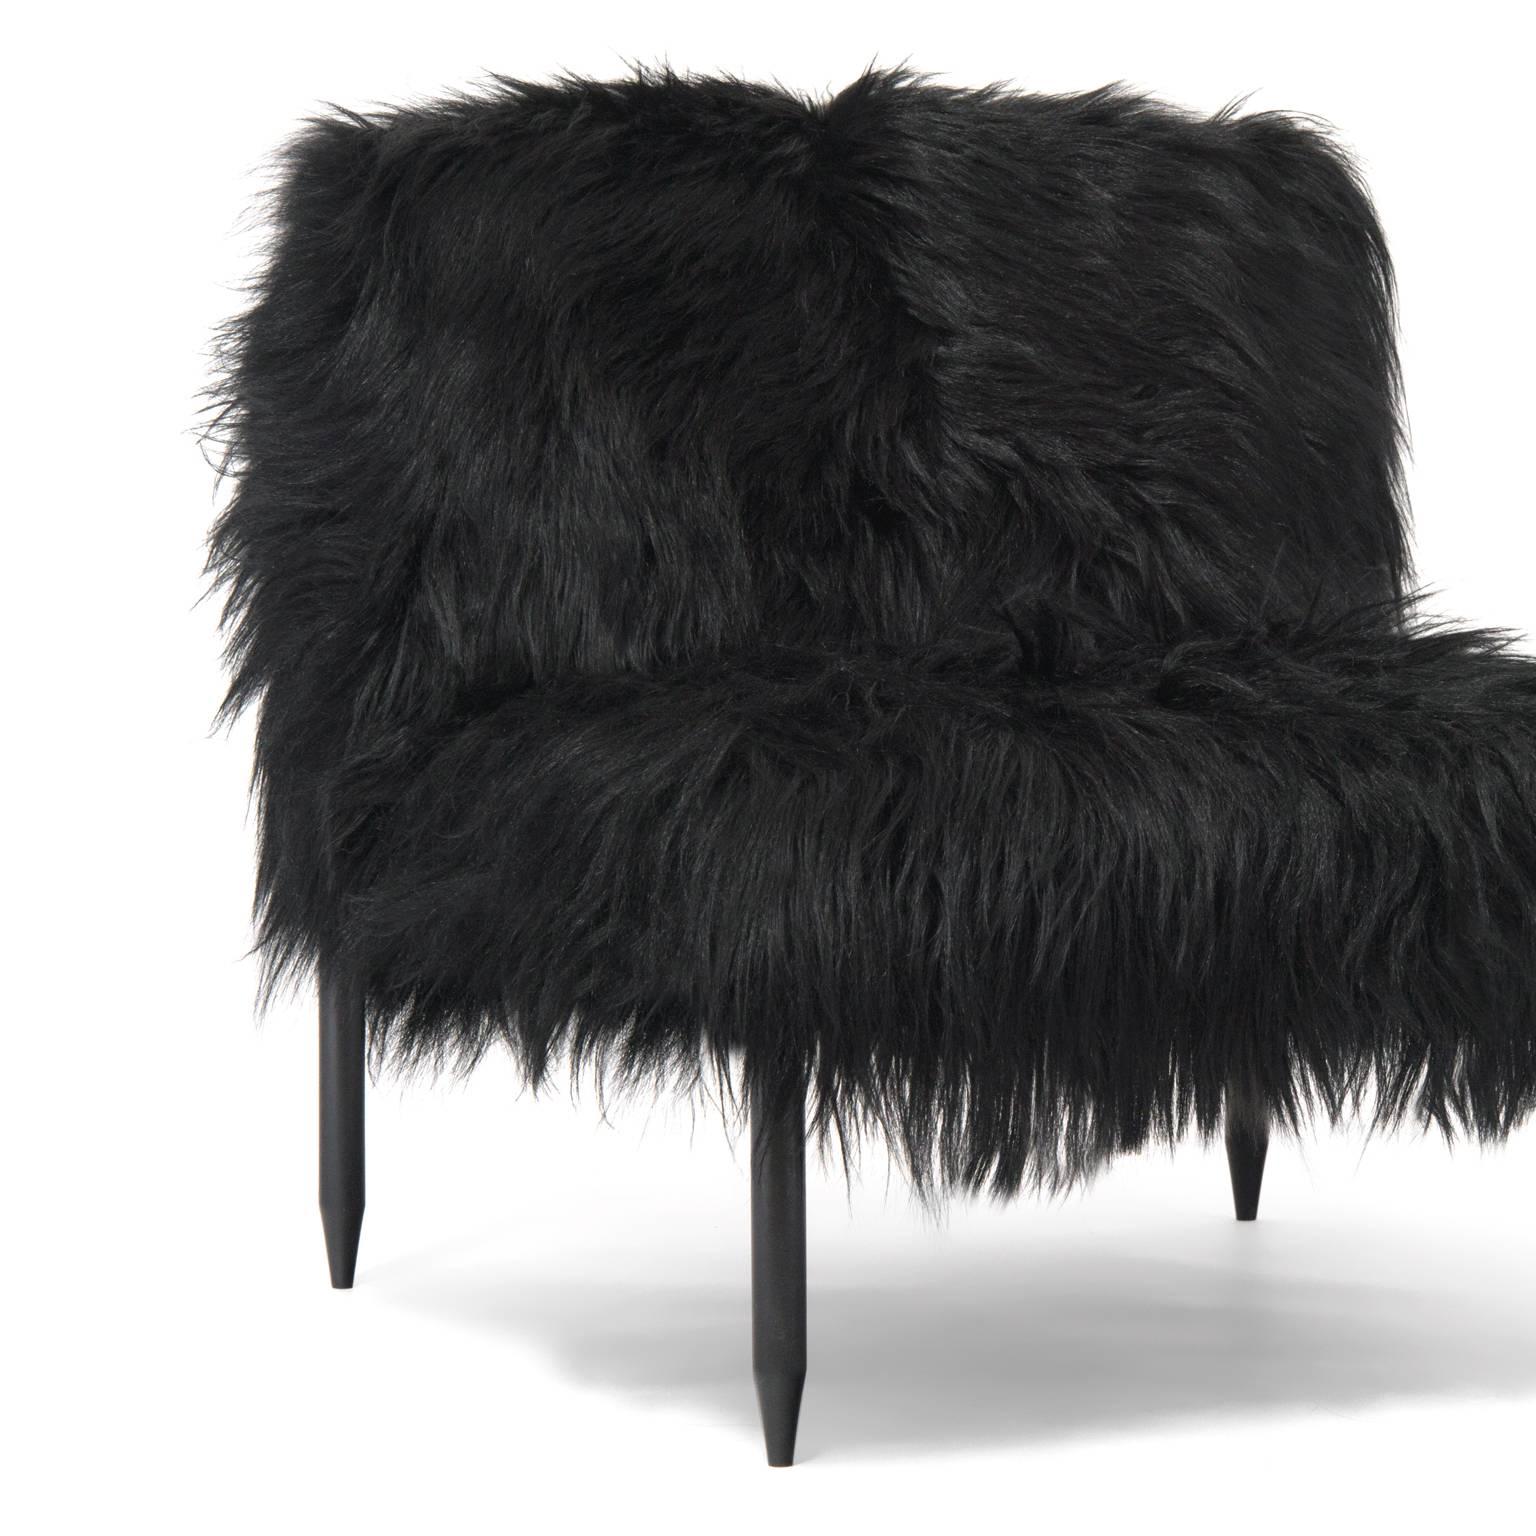 Atelier Demiurge Editions Bianca Slipper Chair shown with goat hair resting on an ebonized frame. Inquire for customization options. COM 5 yards.
 
Atelier Demiurge Editions pieces are made to order. Please contact the gallery for a